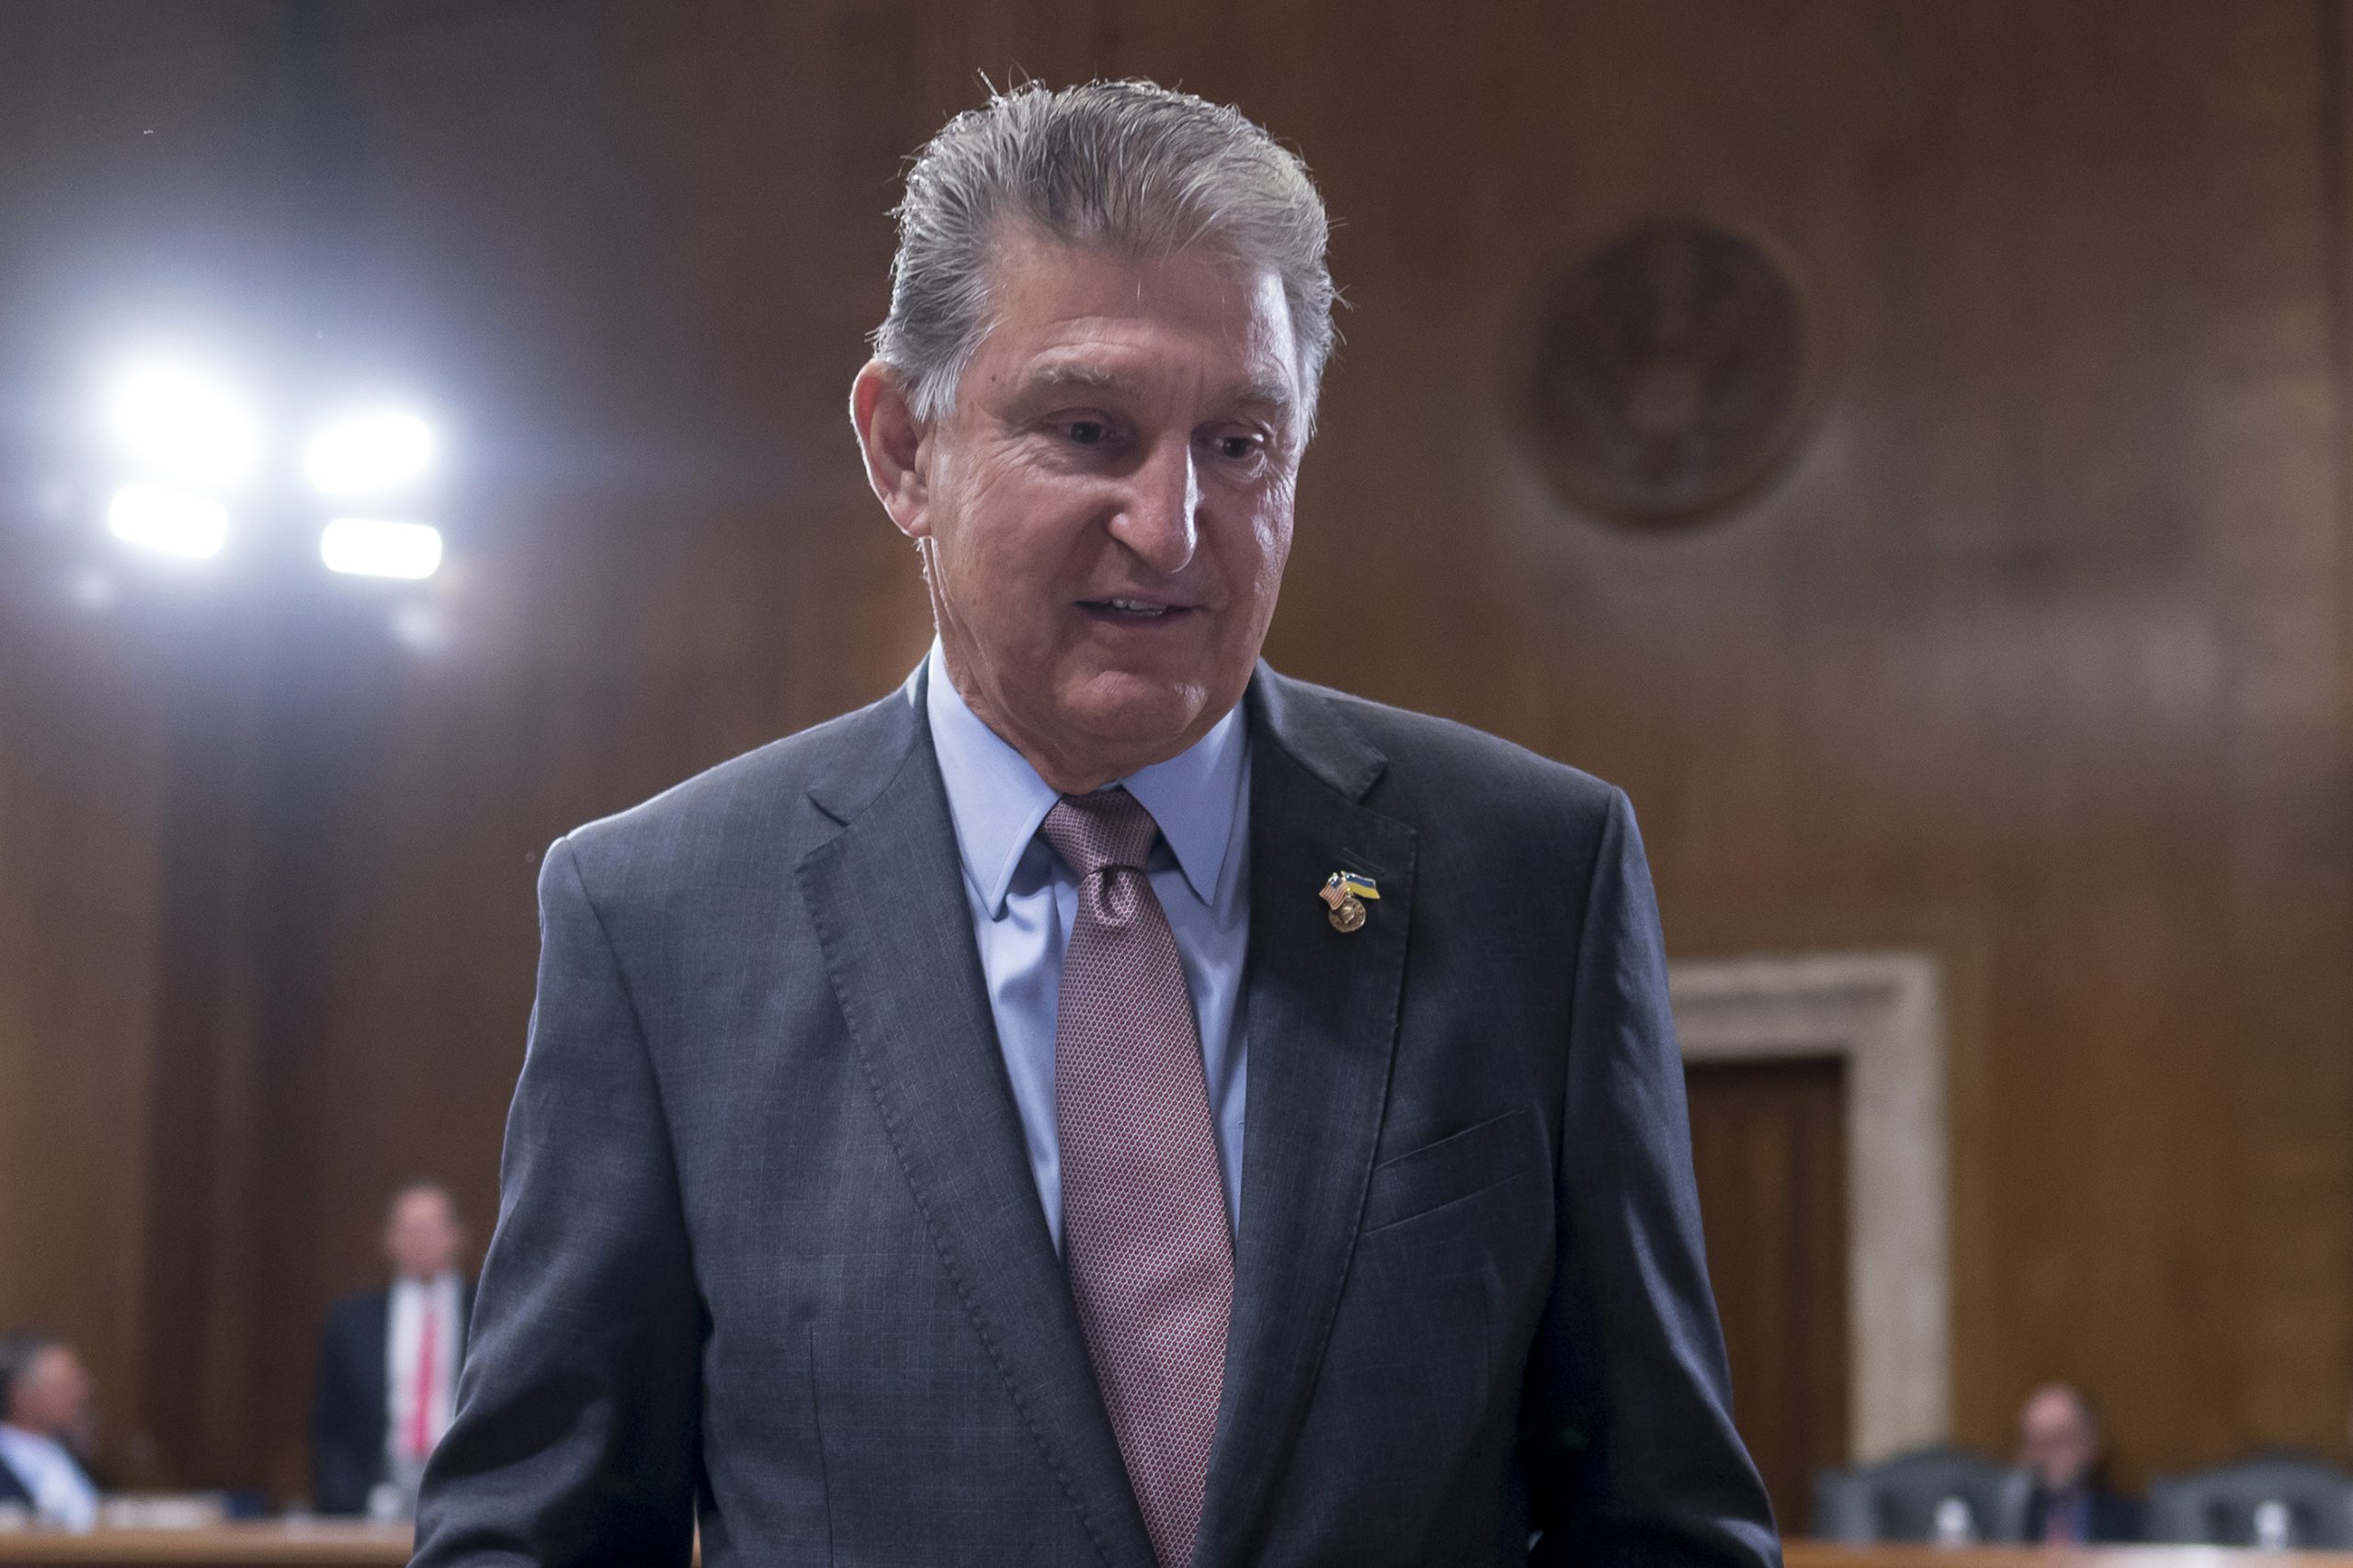 Anxiety mounts over Manchin's potential impact on Democratic vote (Credits: AP Photo)